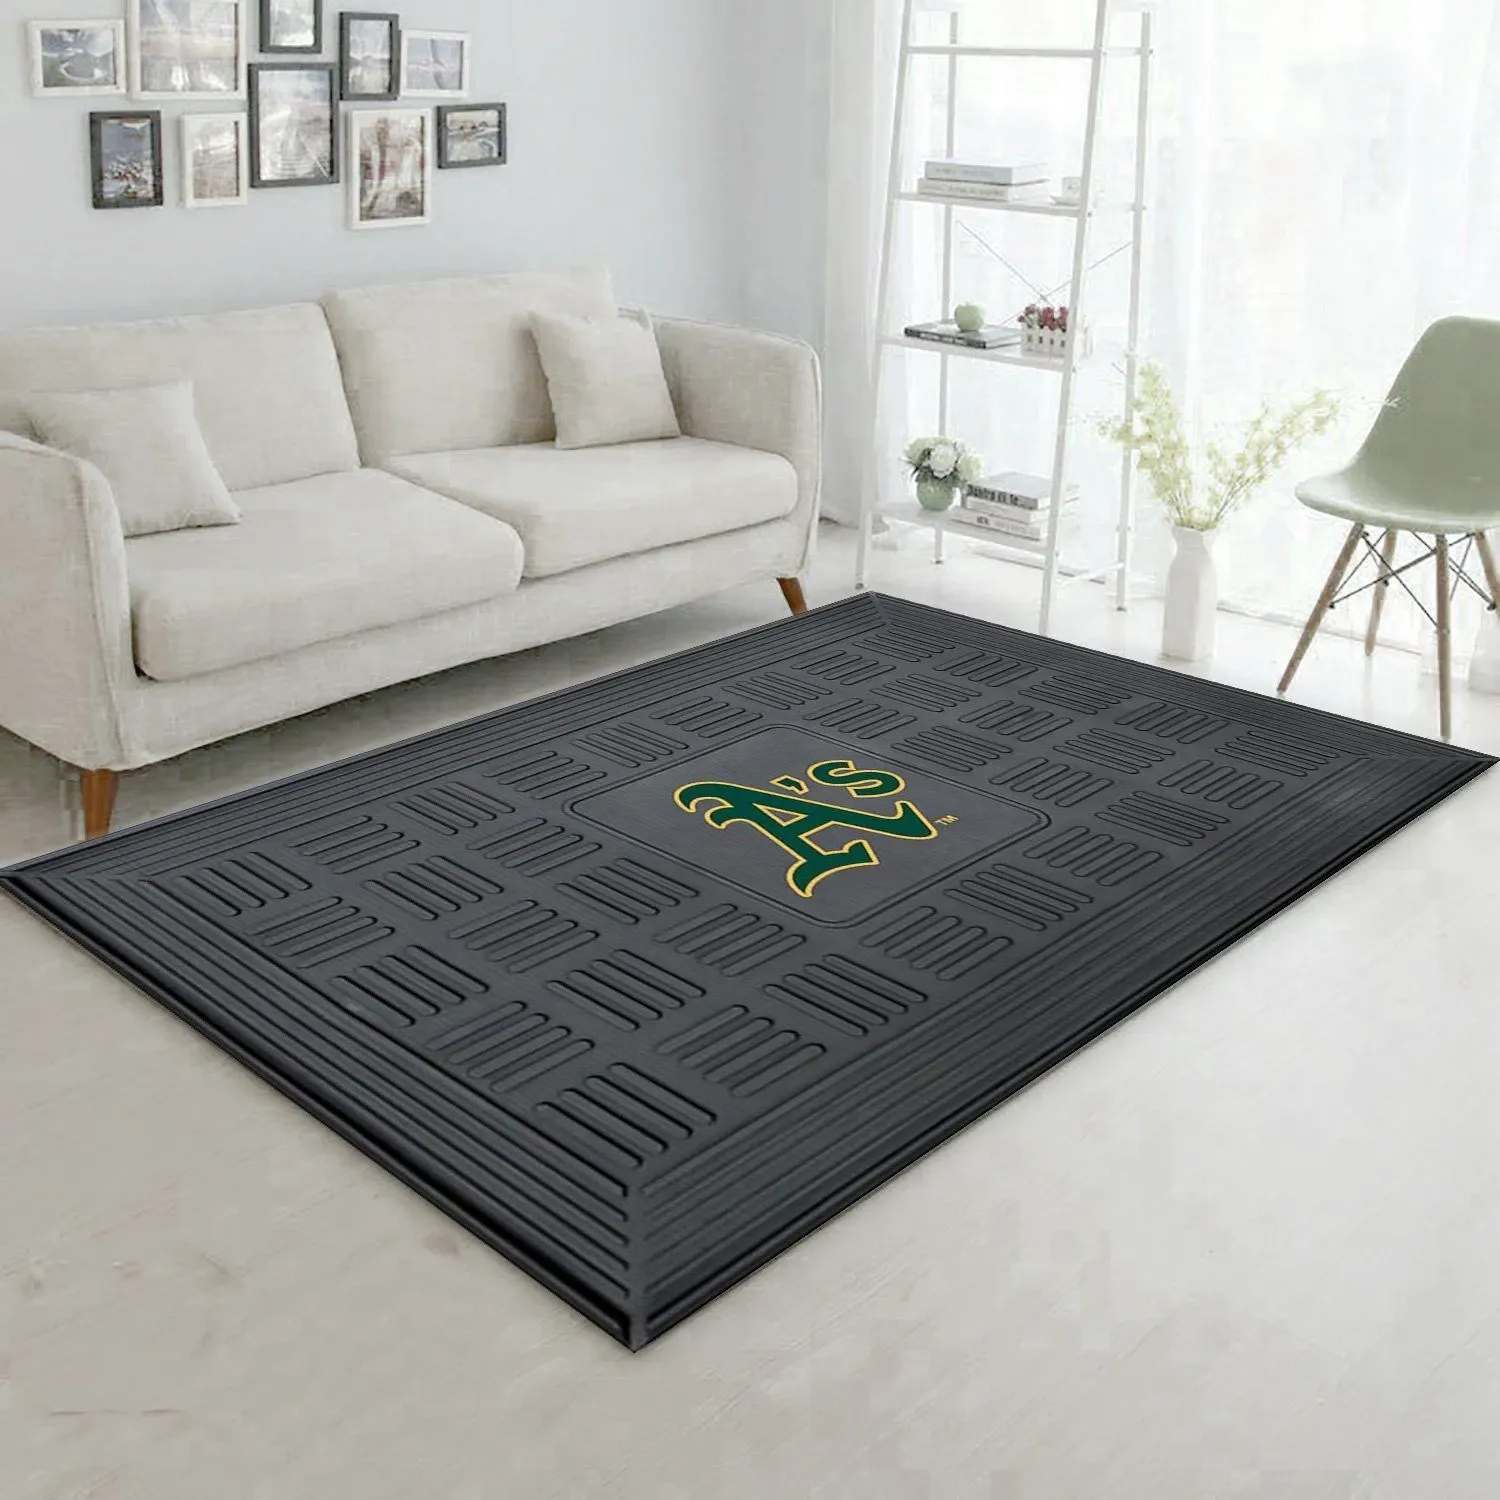 Oakland Athletics Medallion Area Rug For Christmas, Bedroom, Family Gift US Decor - Indoor Outdoor Rugs 2